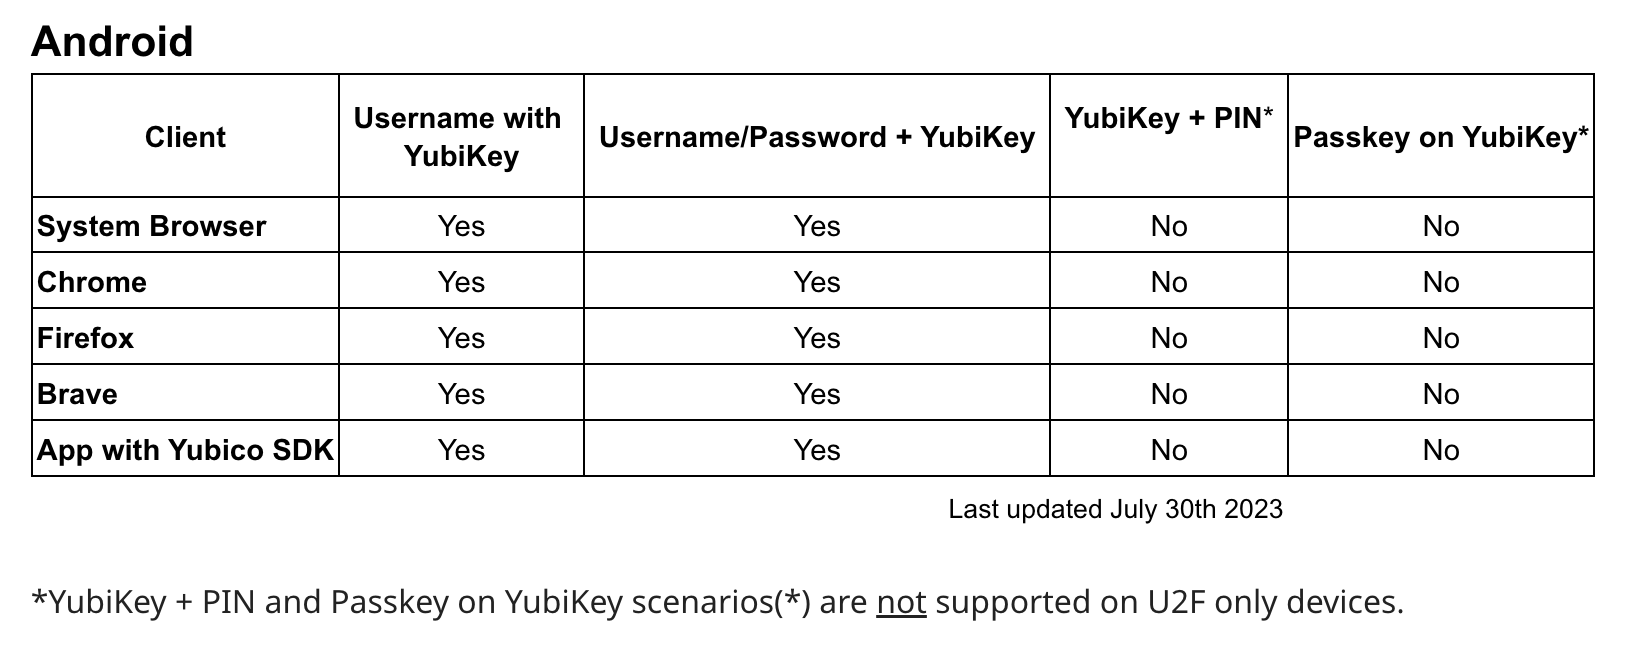 Uneven support of Yubikey authentication on Android devices: not all options are supported for users and available for developers.